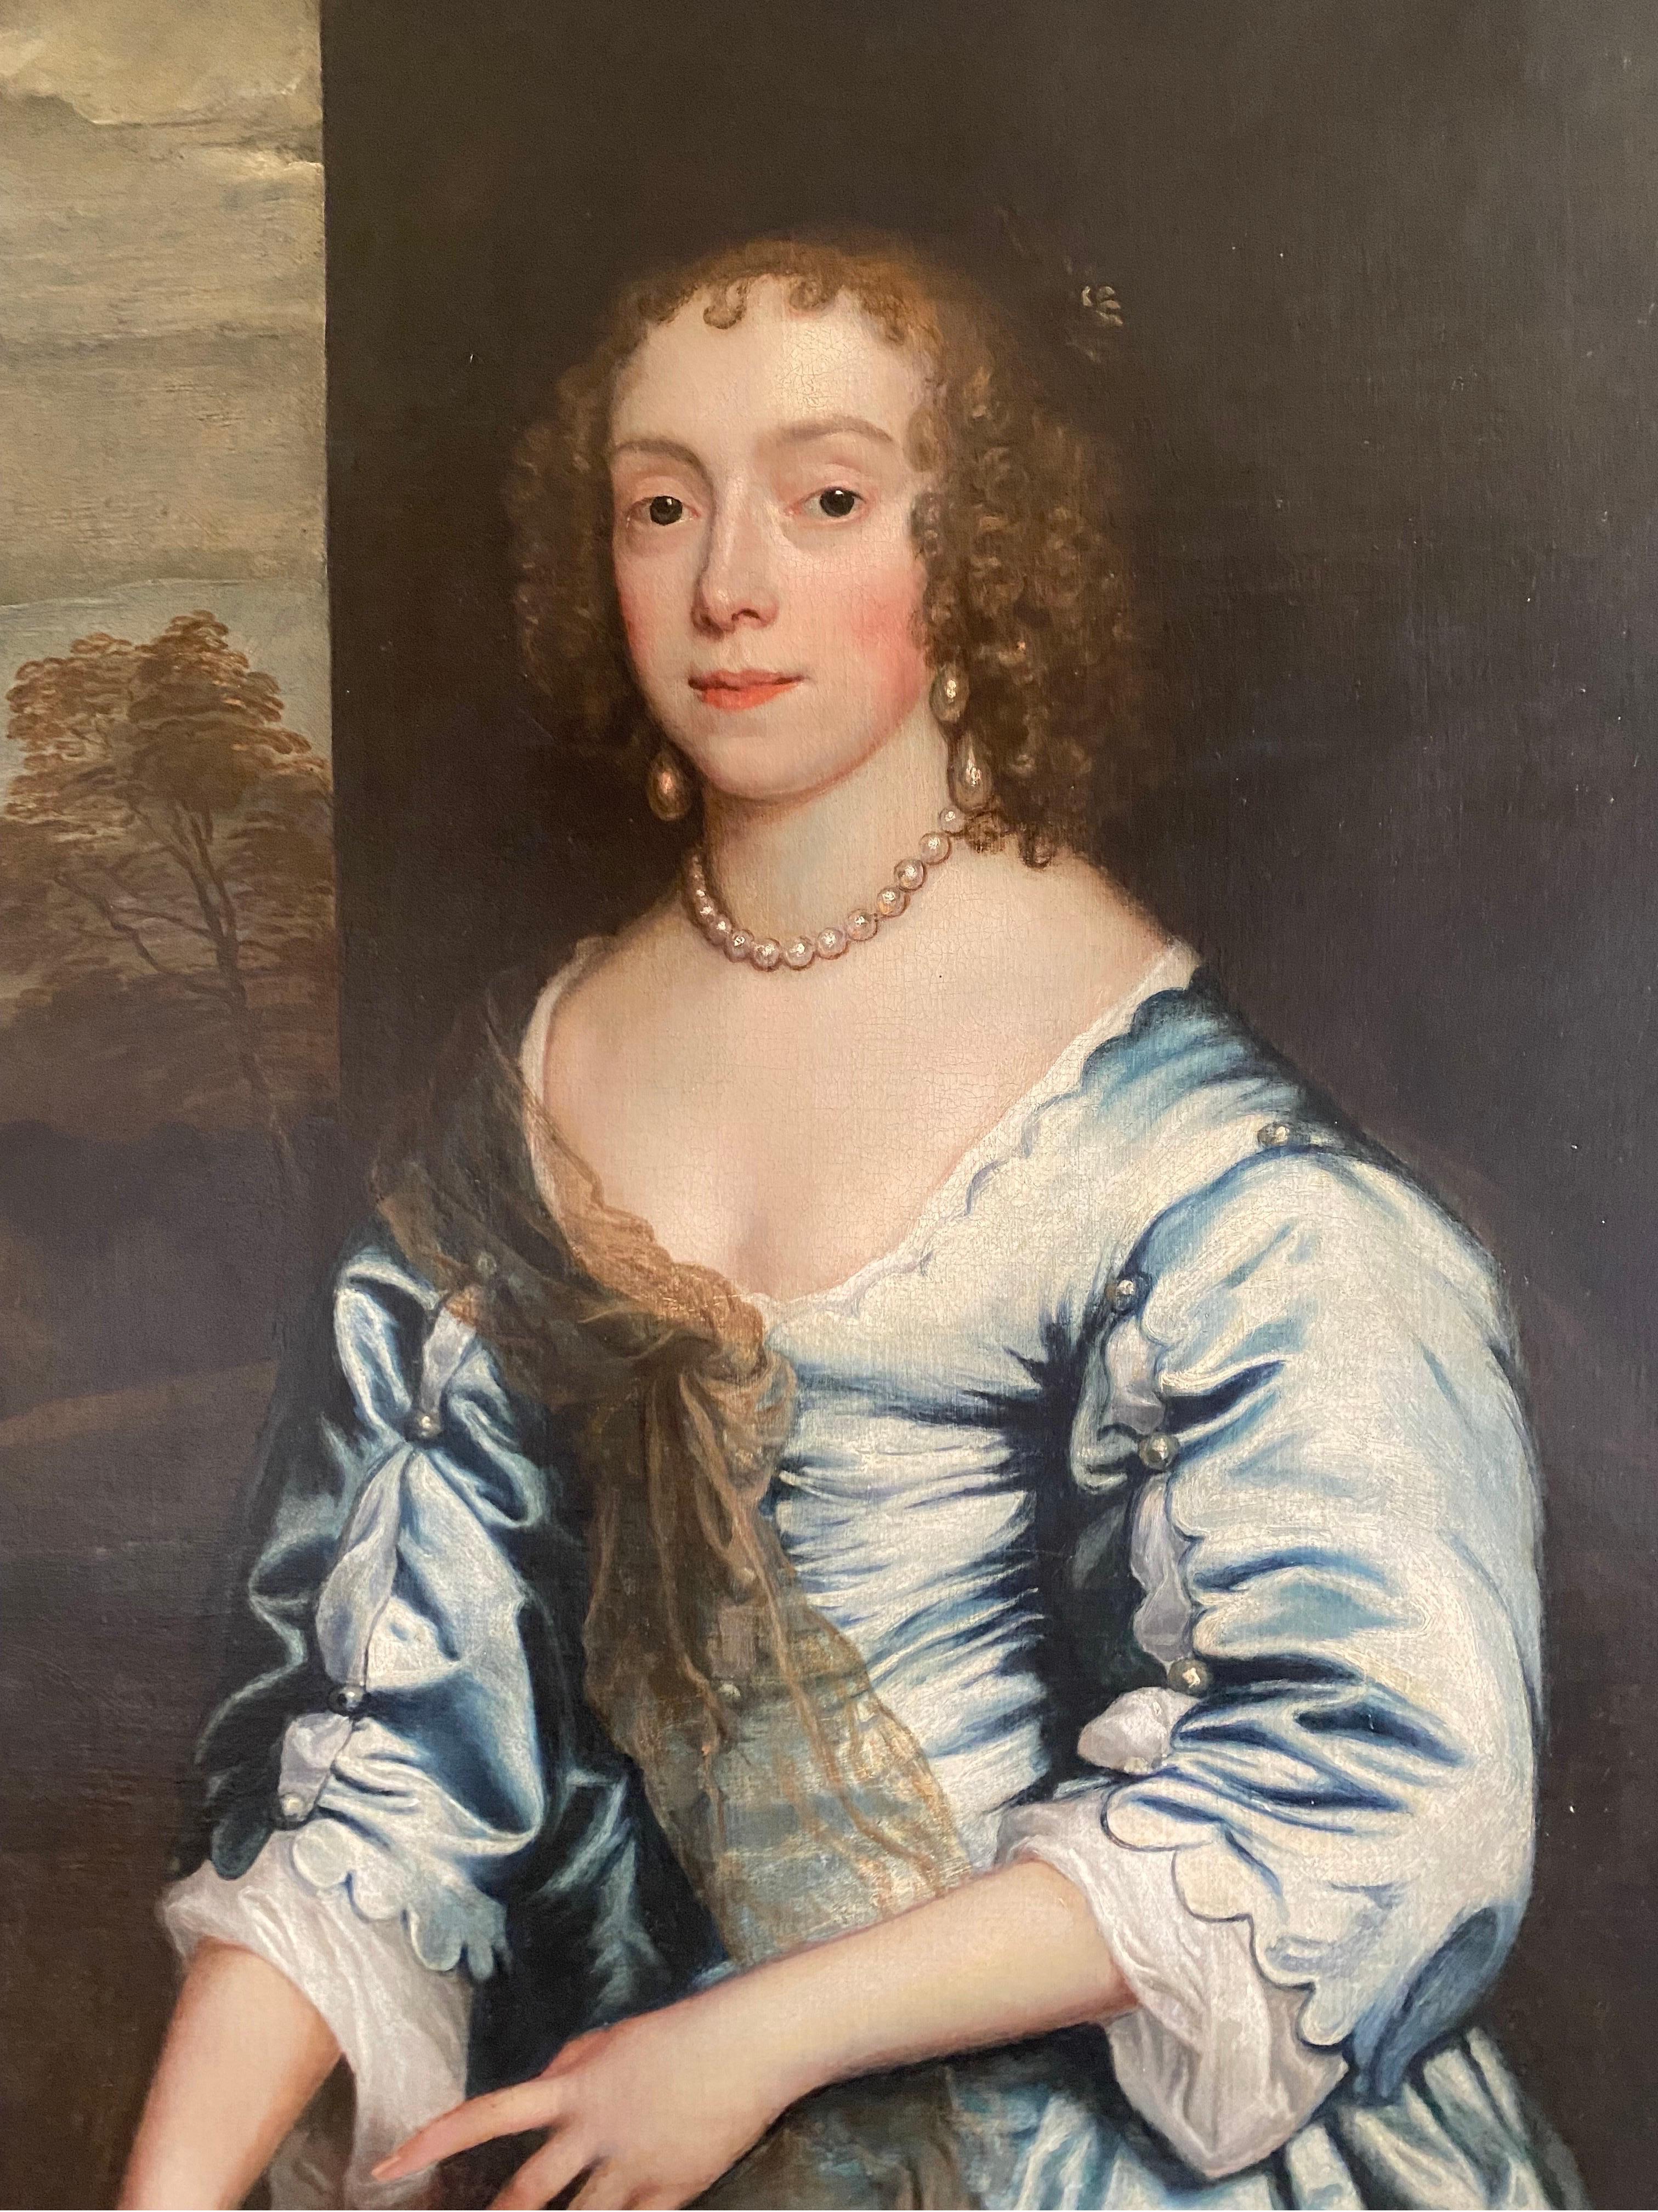  17th century portrait of Lady Anne Berney of Park Hall, Norfolk - Black Portrait Painting by Anthony Van Dyck